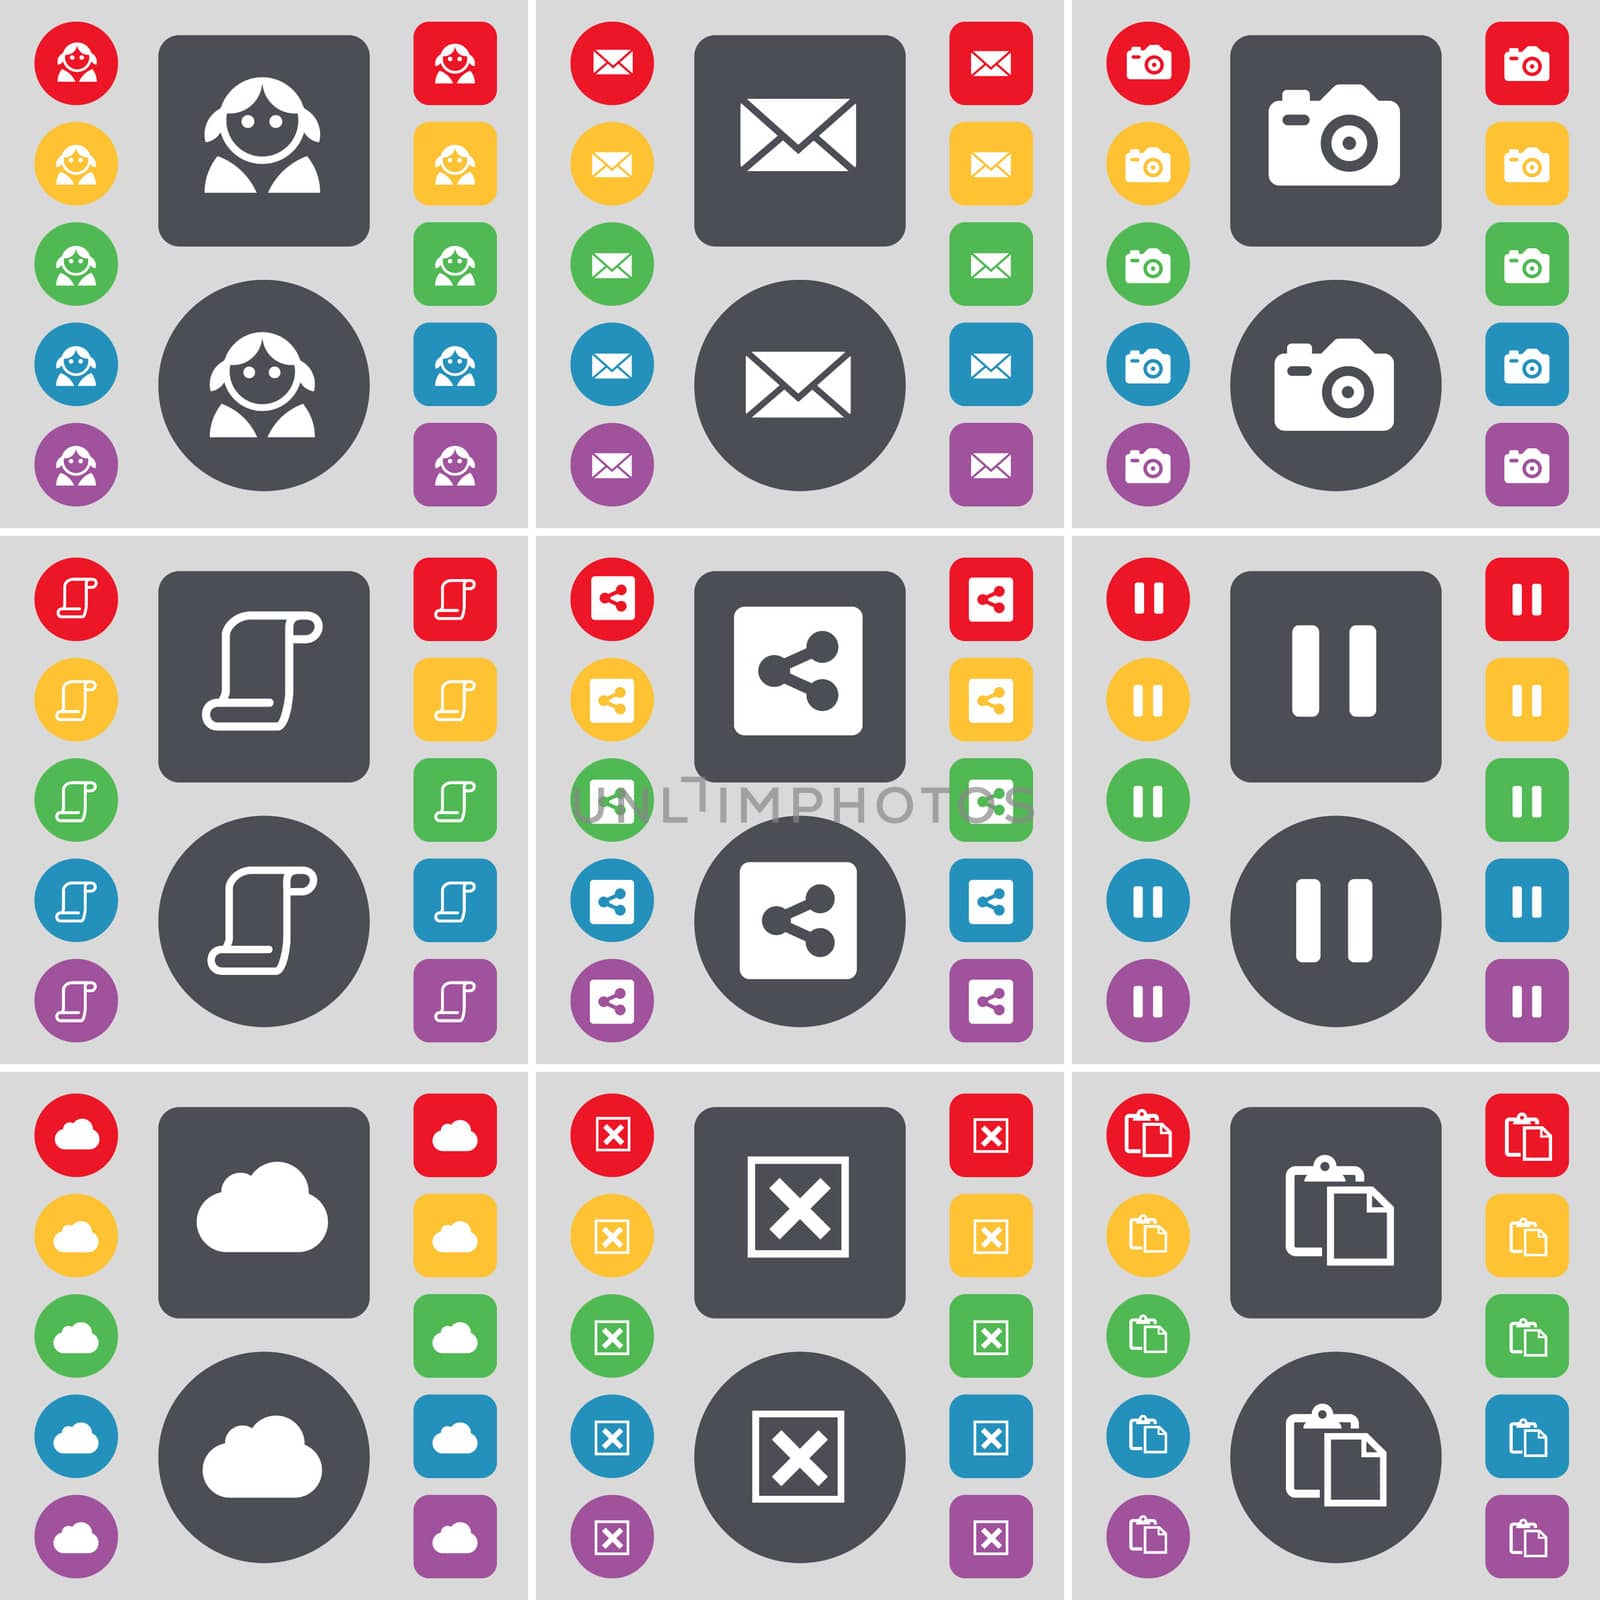 Avatar, Message, Camera, Scroll, Share, Pause, Cloud, Stop, Survey icon symbol. A large set of flat, colored buttons for your design.  by serhii_lohvyniuk